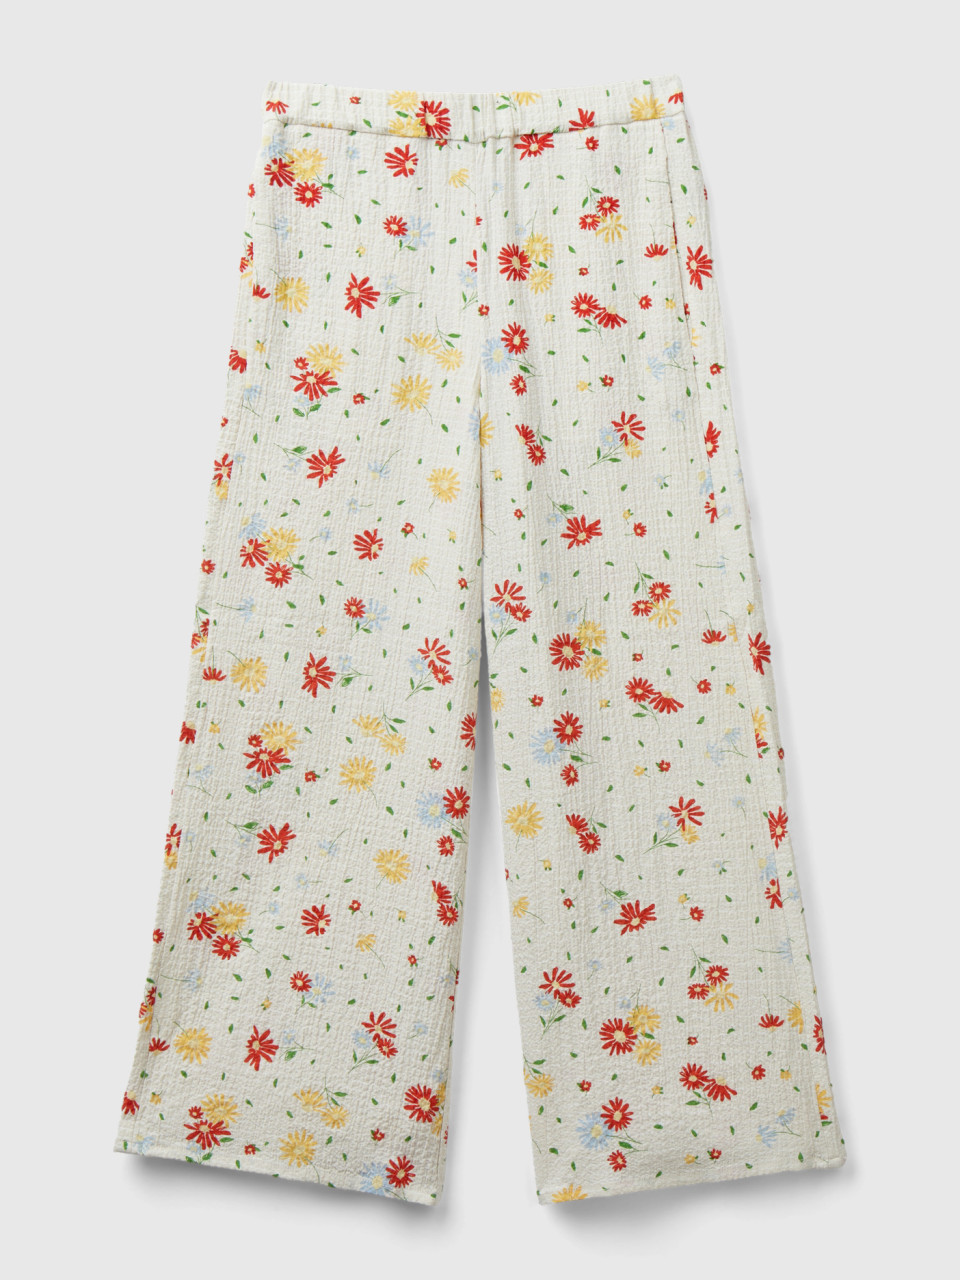 Benetton, Lightweight Floral Trousers, Creamy White, Kids